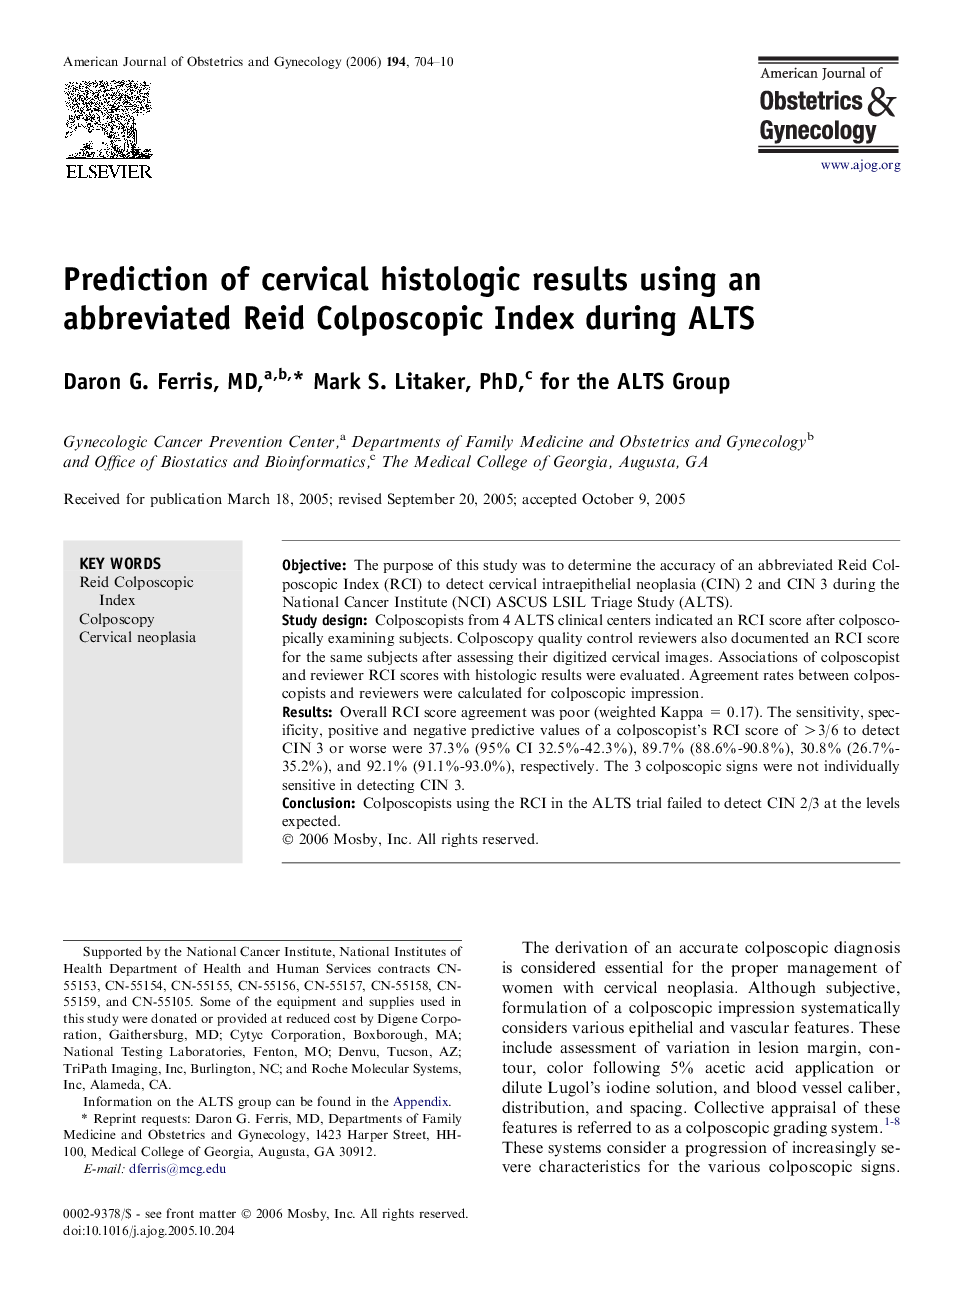 Prediction of cervical histologic results using an abbreviated Reid Colposcopic Index during ALTS 